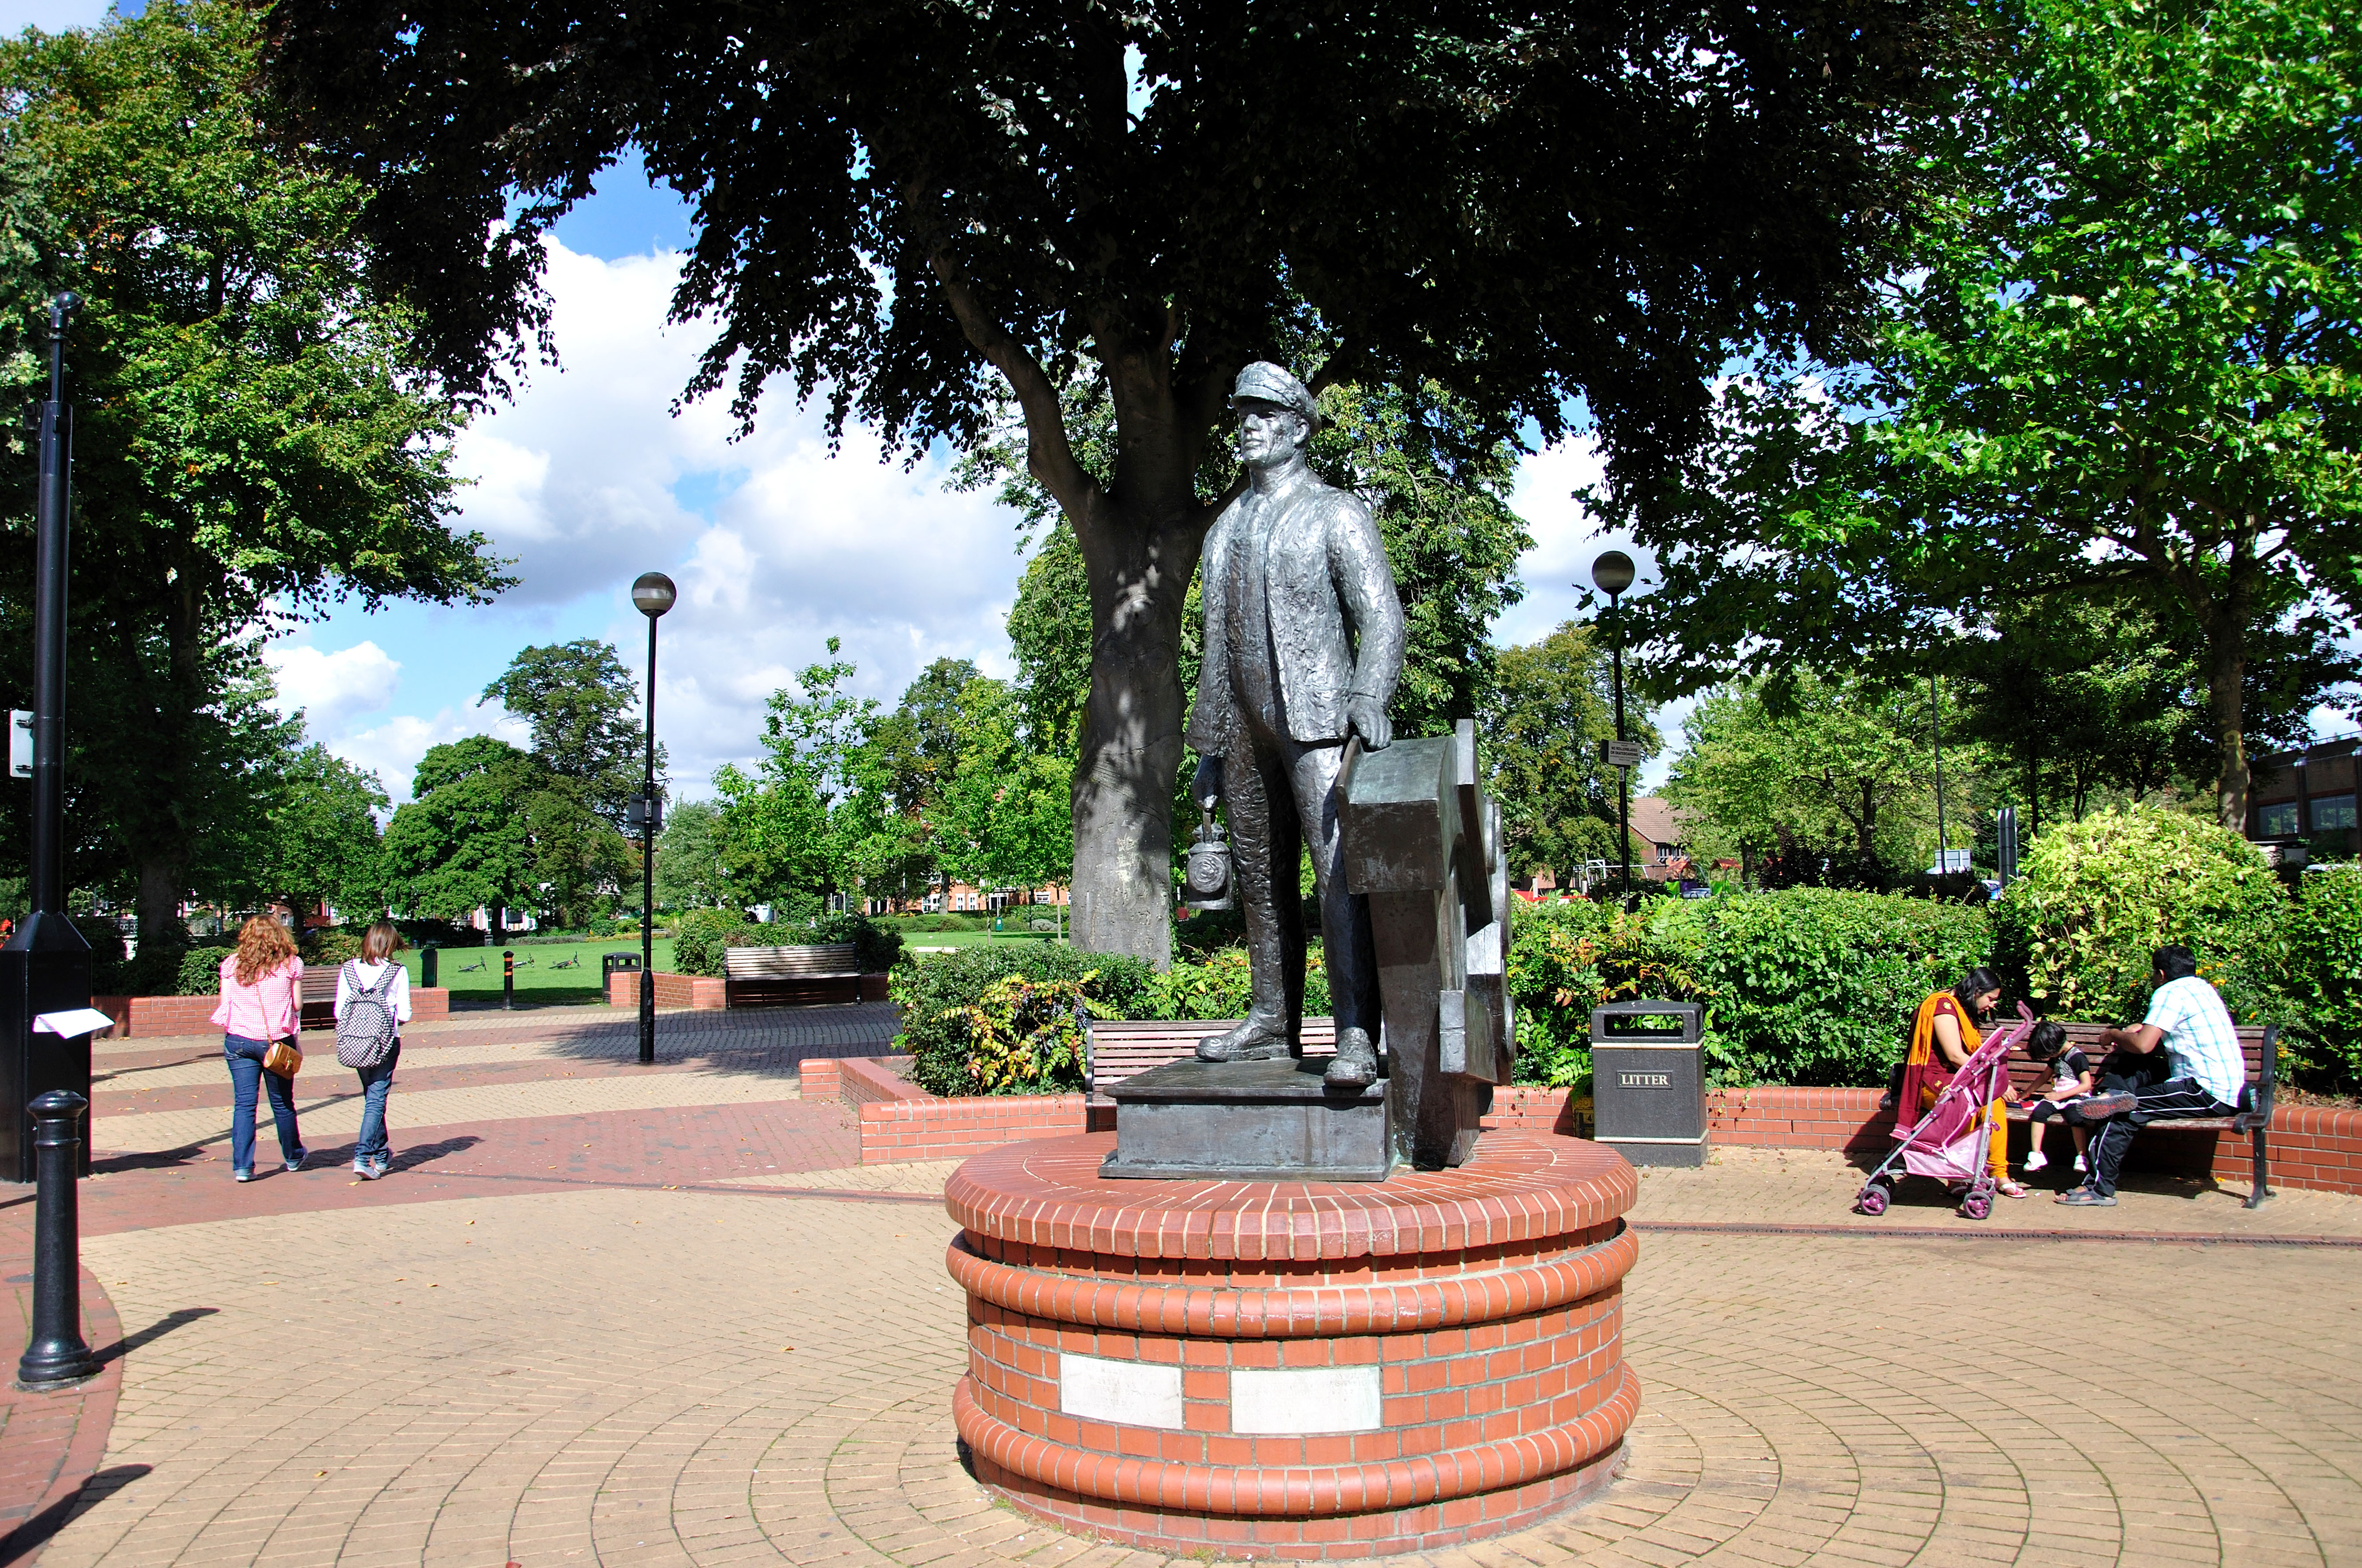 Image of a statue of a man in a town square